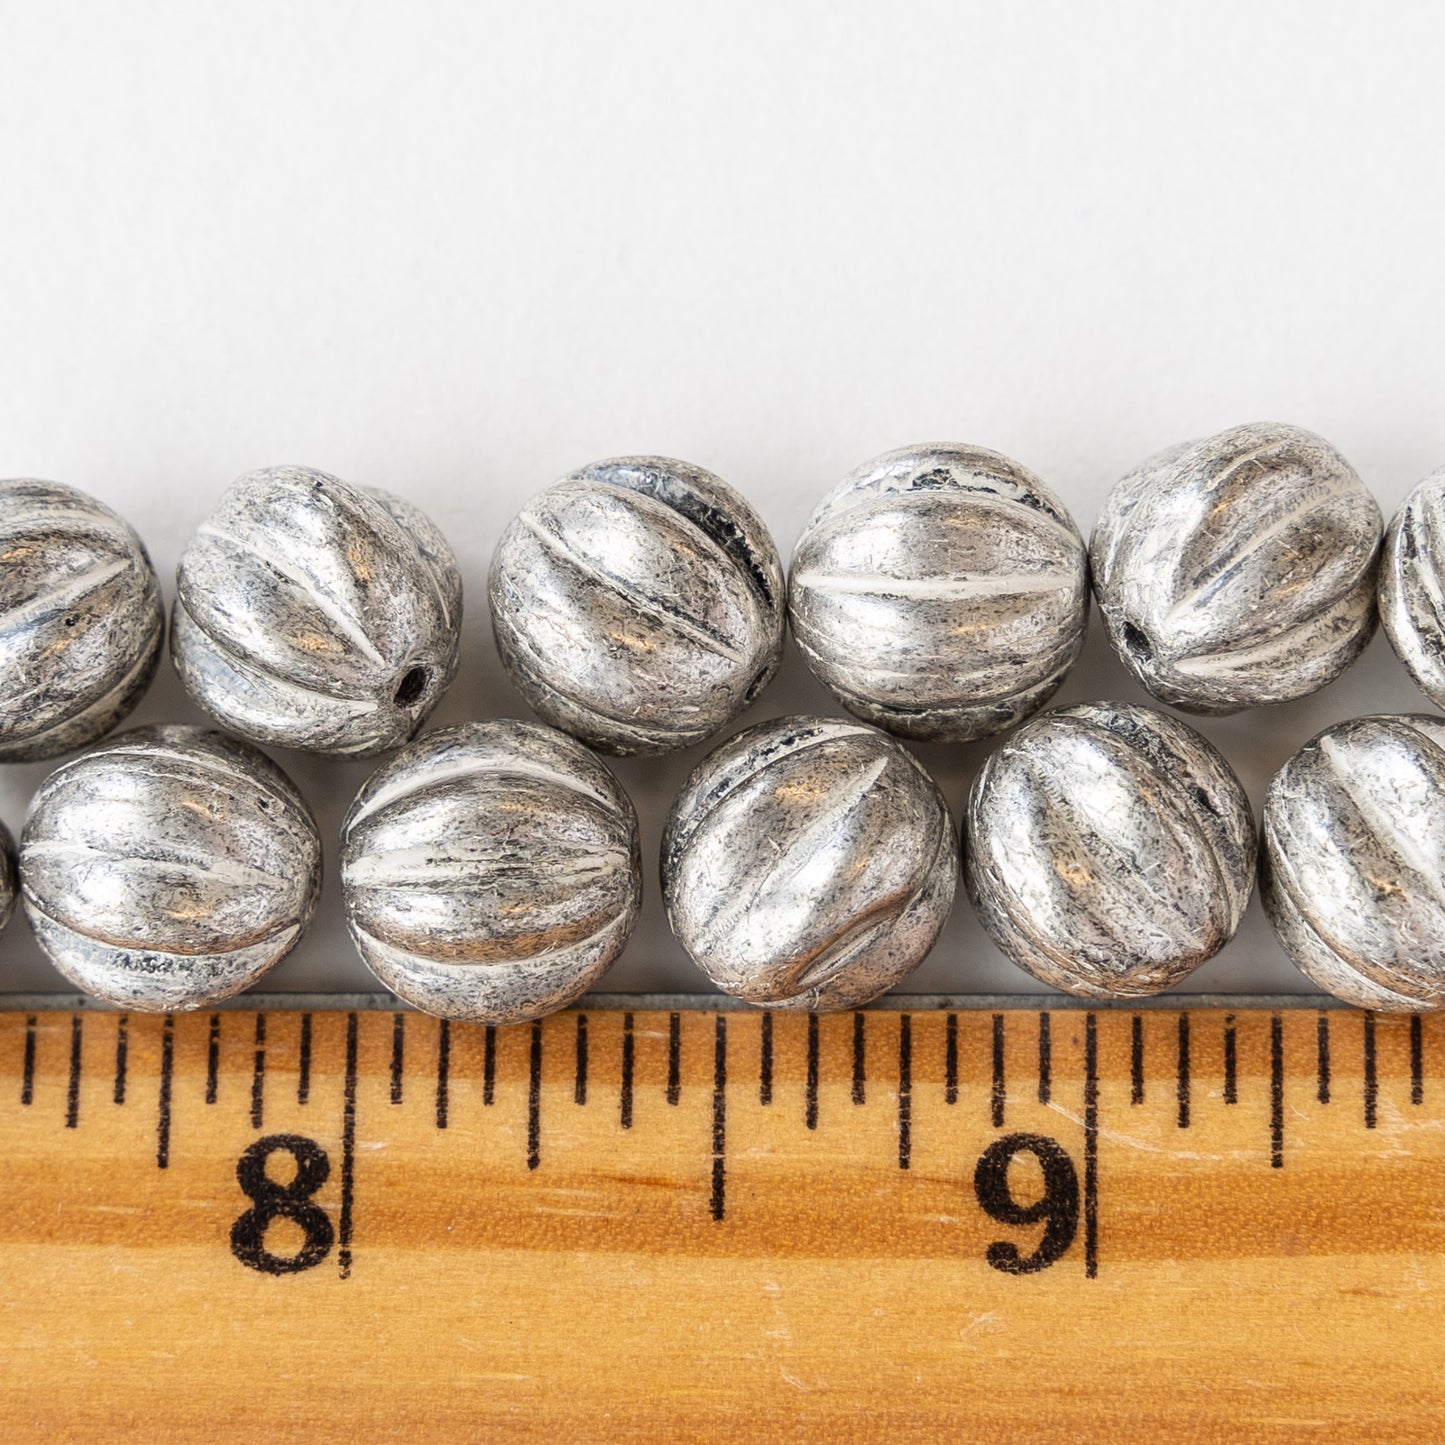 10mm Melon Beads - Antiqued Silver - 15 Beads